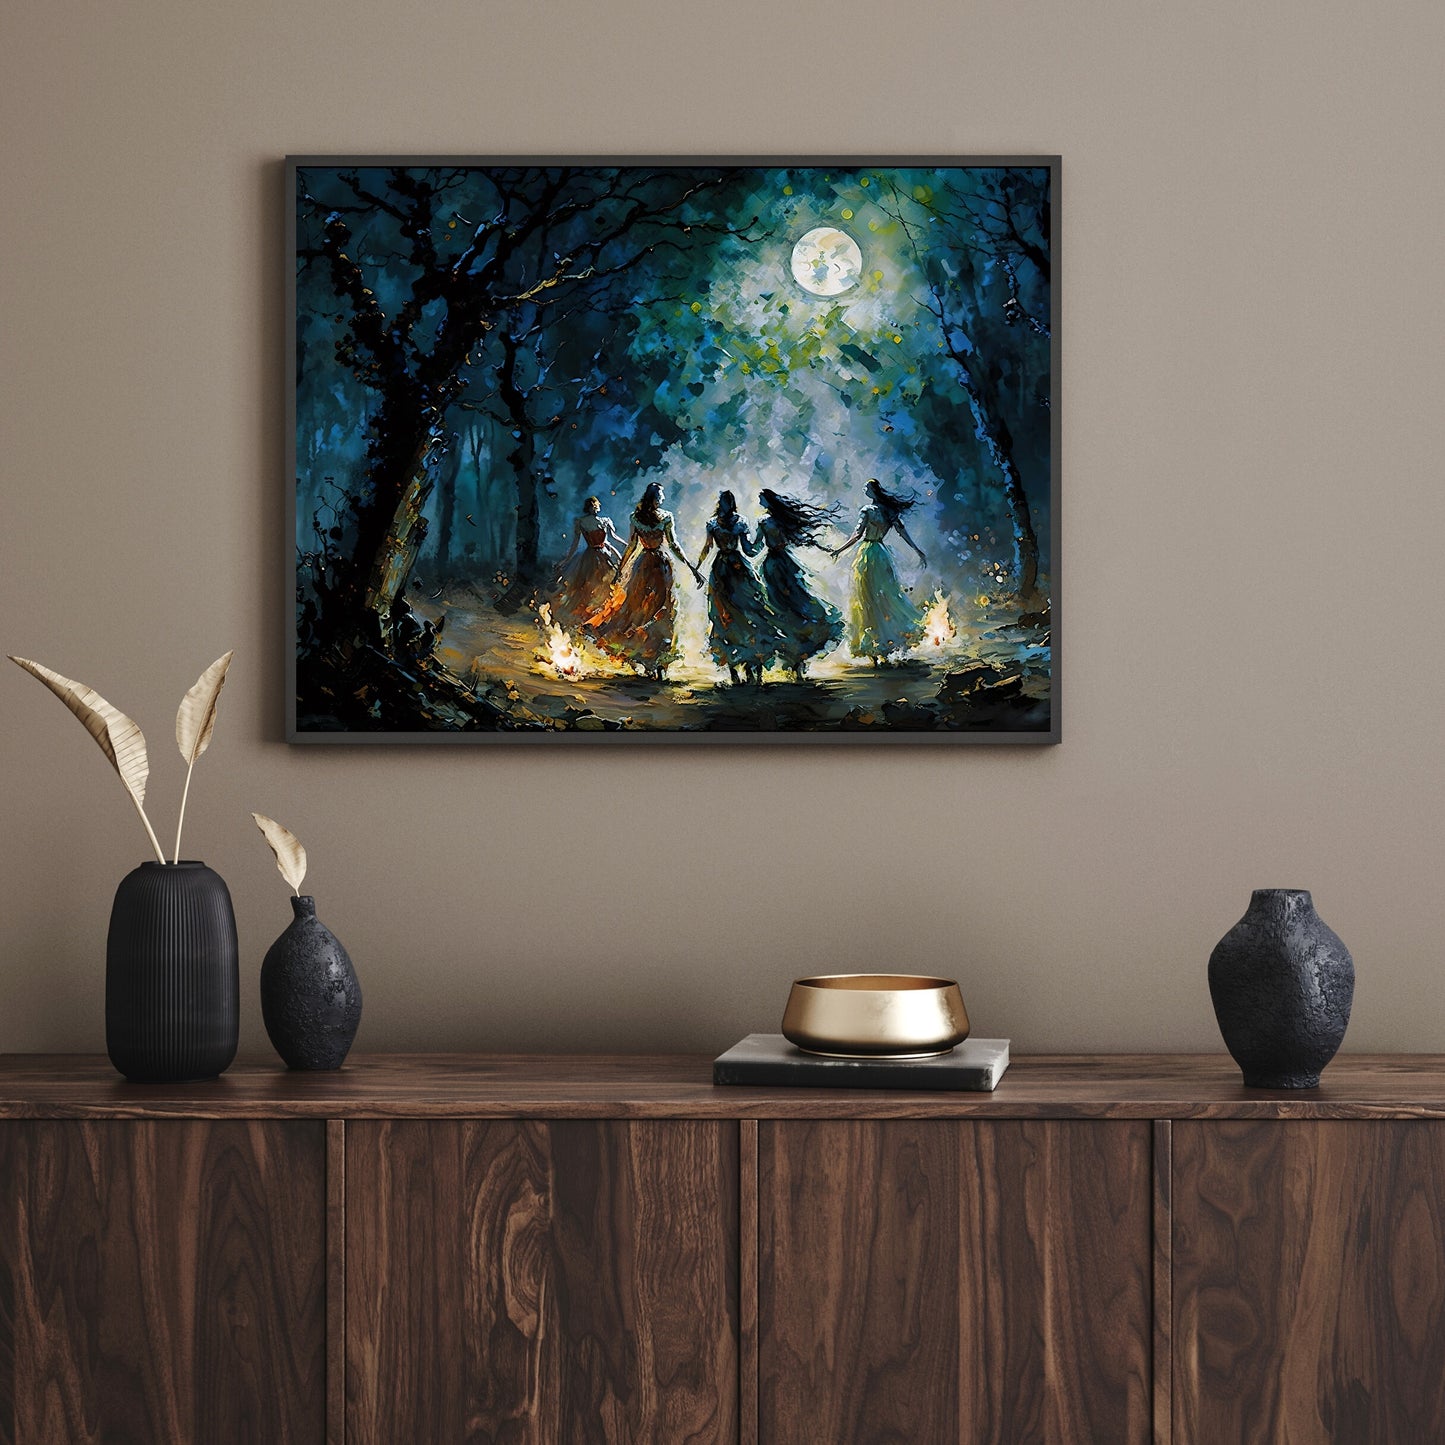 Witches at Full Moon Wall Art, Gothic Decor, Impressionistic Painting, Nightsky, Woodland, Bonfire Light, Mystical Atmosphere  Paper Poster Prints